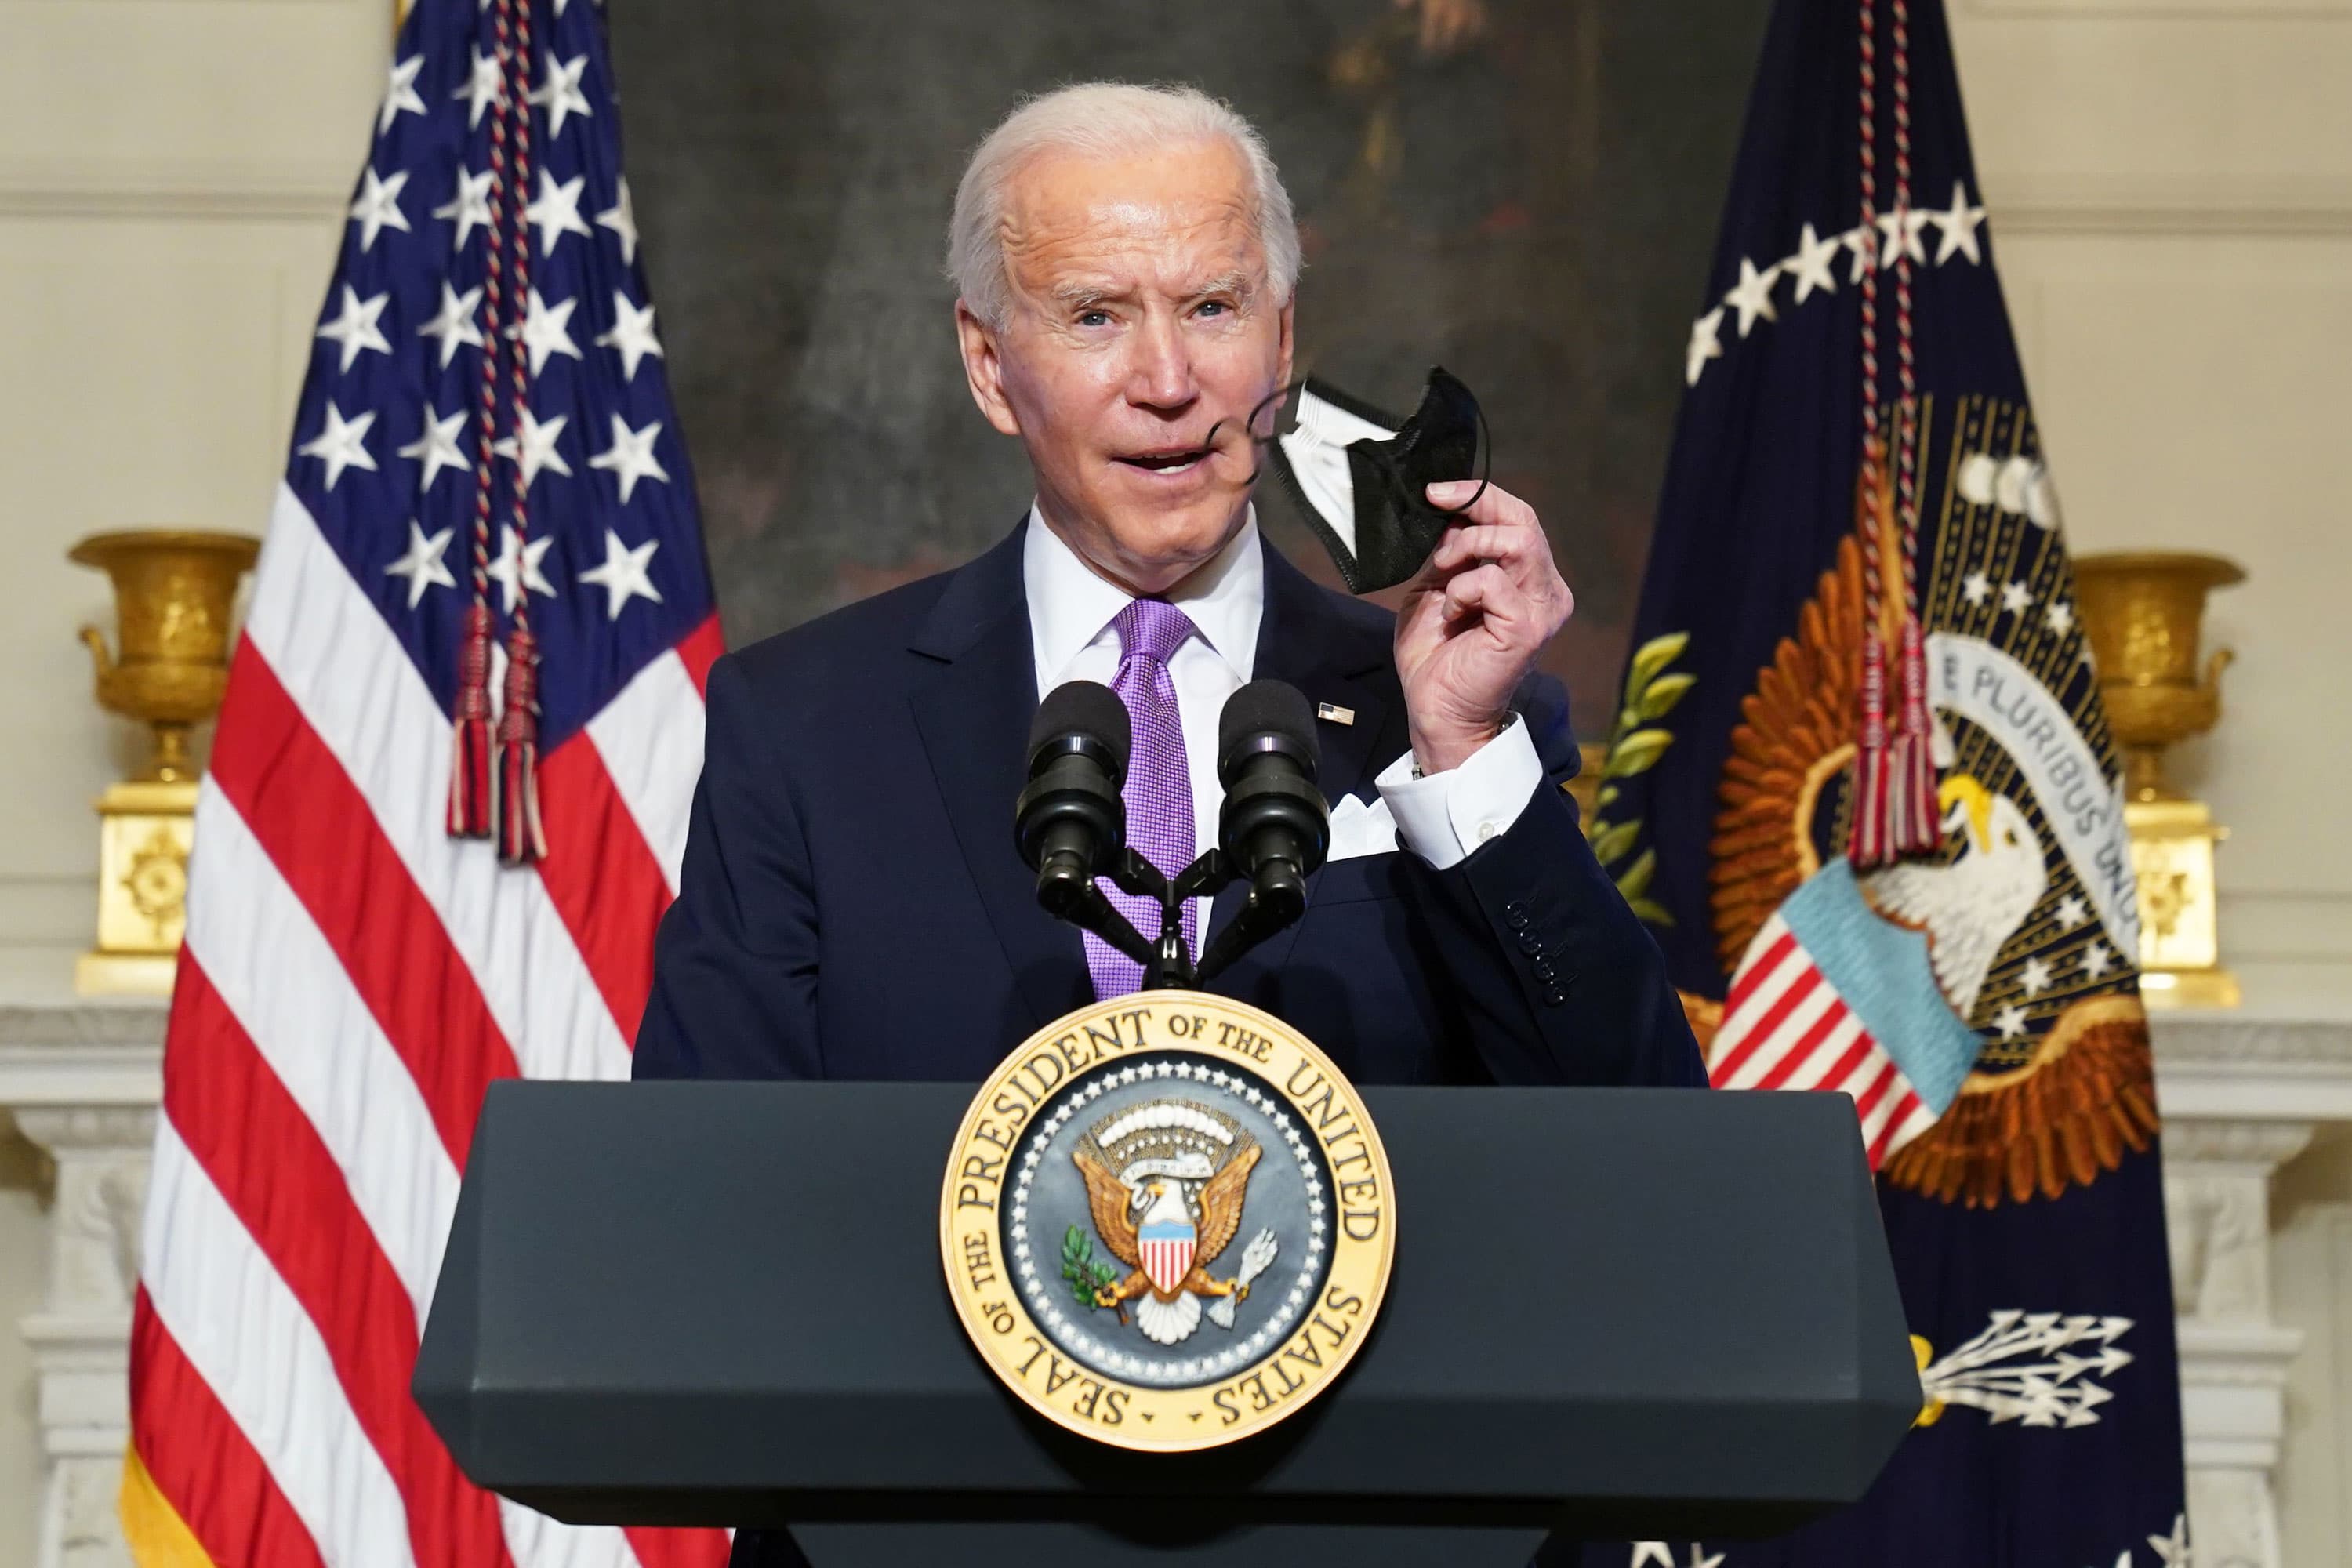 Biden to sign major executive orders on climate change - CNBC